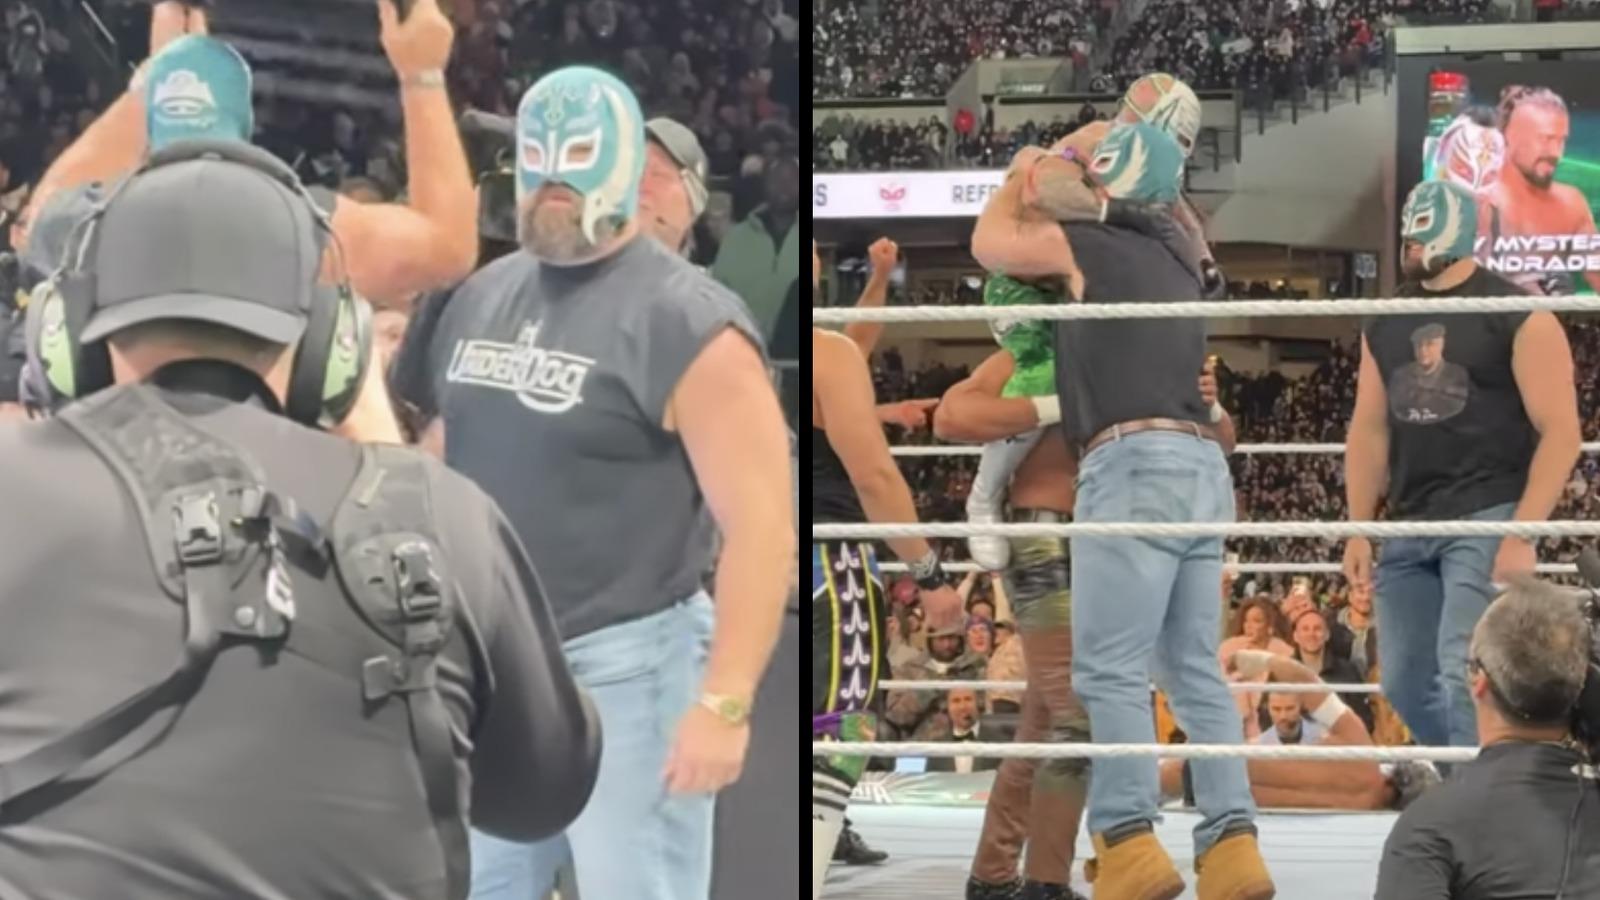 Jason Kelce storms the ring at Wrestlemania 40 to assist WWE legend Rey Mysterio